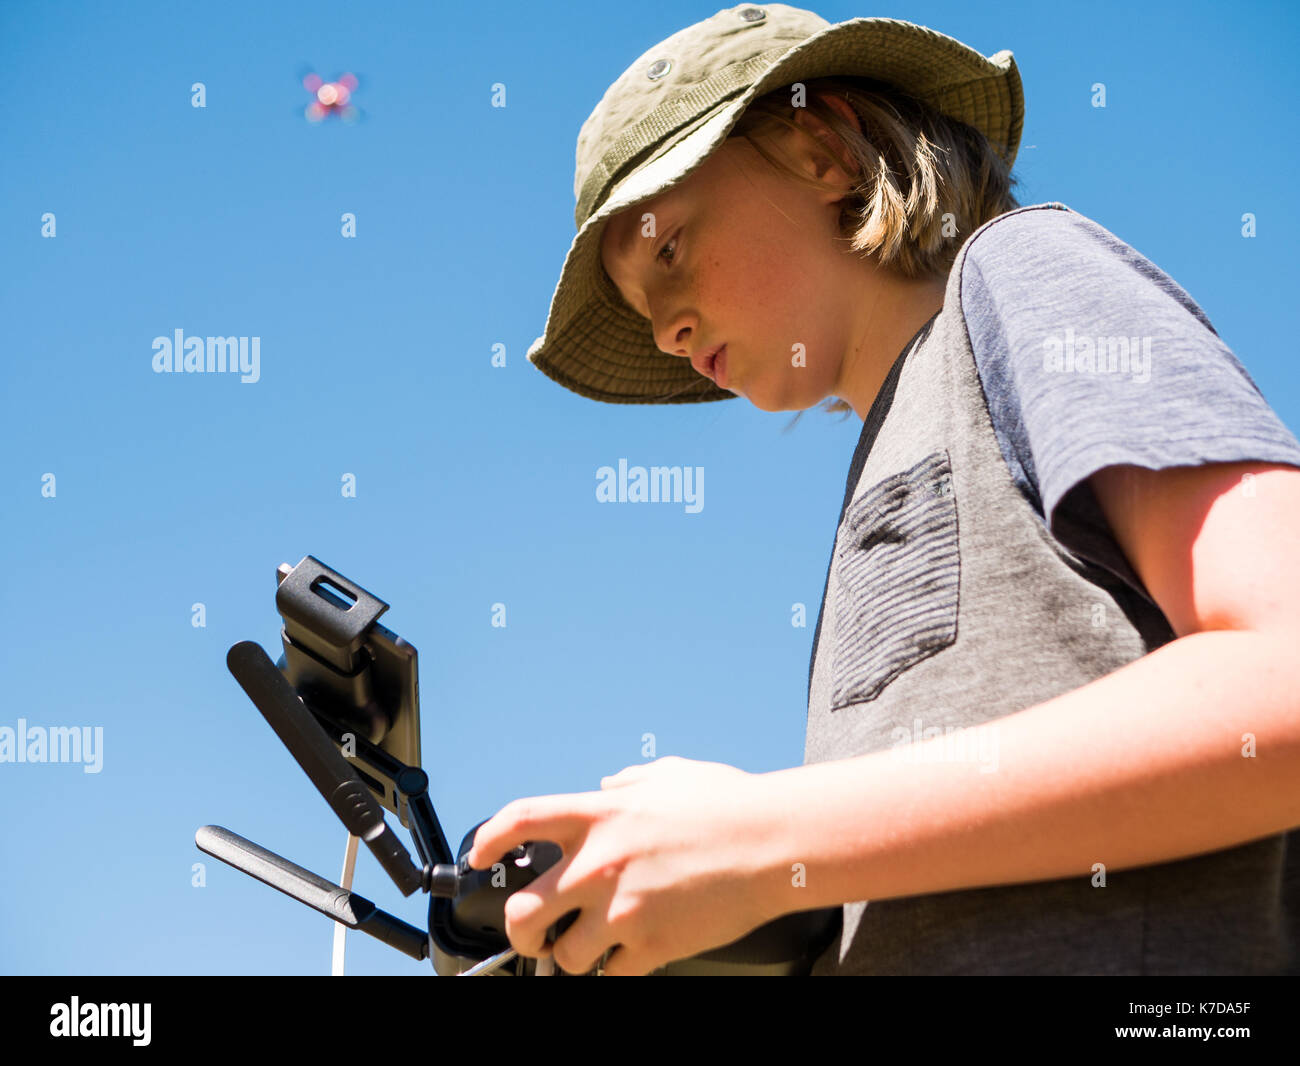 Low angle view of boy flying quadcopter using remote control against clear sky Stock Photo